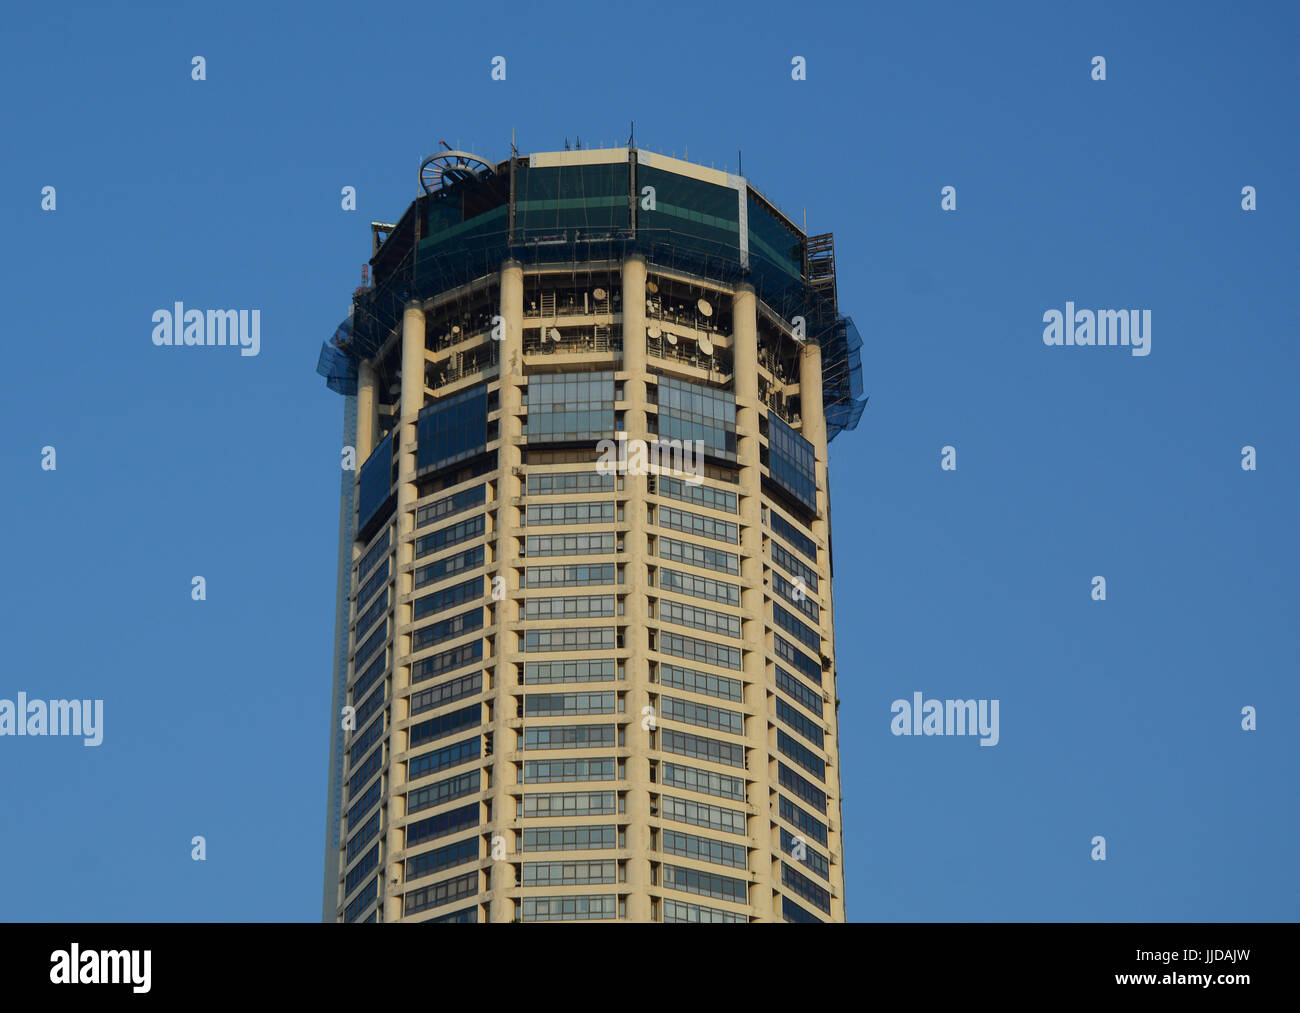 Penang, Malaysia - Mar 9, 2016. The Komtar Building in Penang, Malaysia. Penang is also one of the most urbanised and economically-important states in Stock Photo